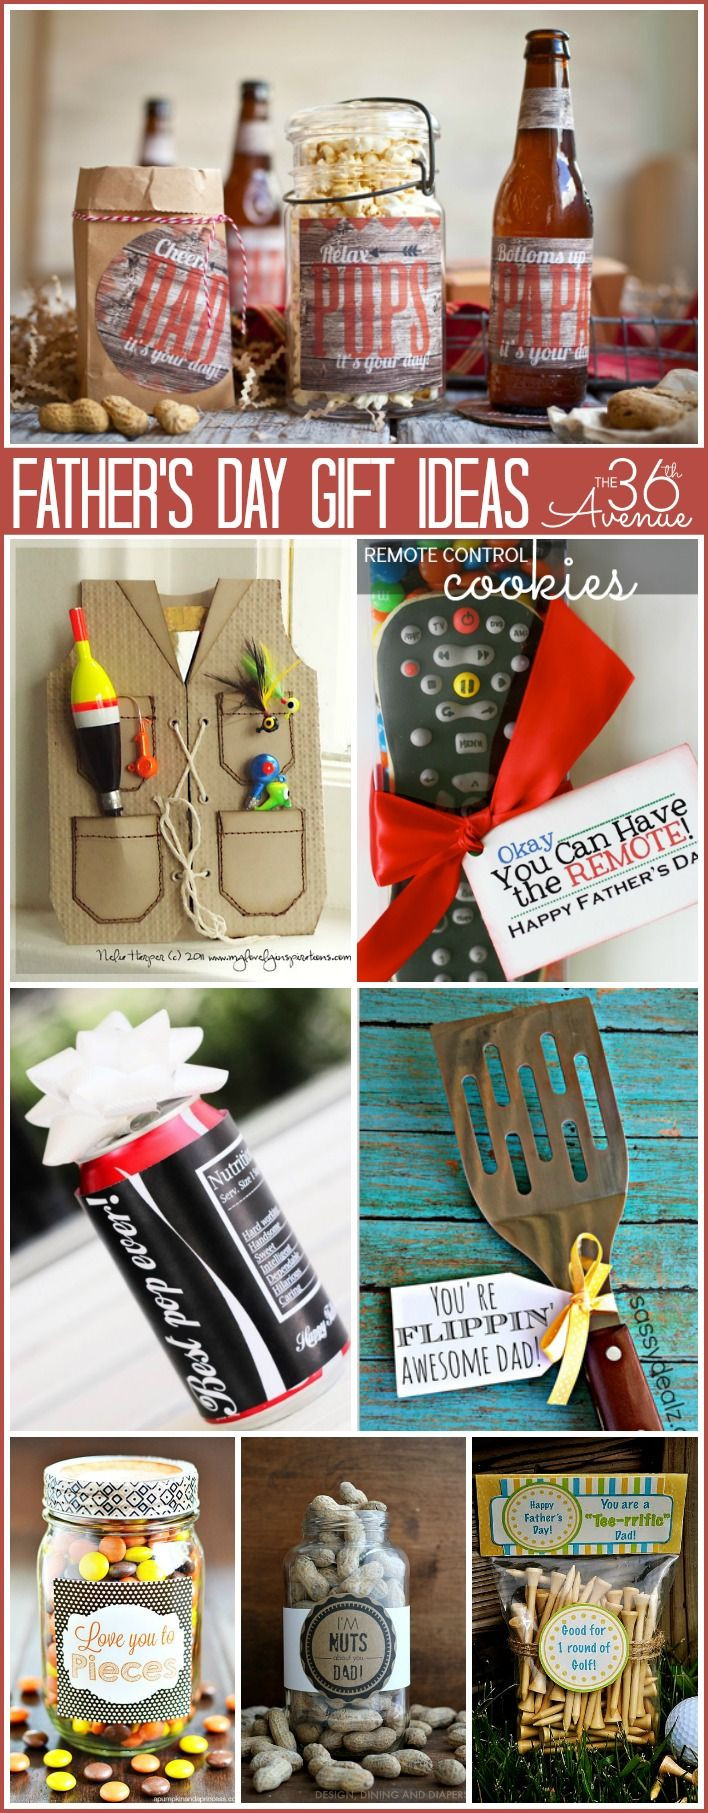 Best Fathers Day Gift Ideas
 84 best images about Creative Father s Day Ideas on